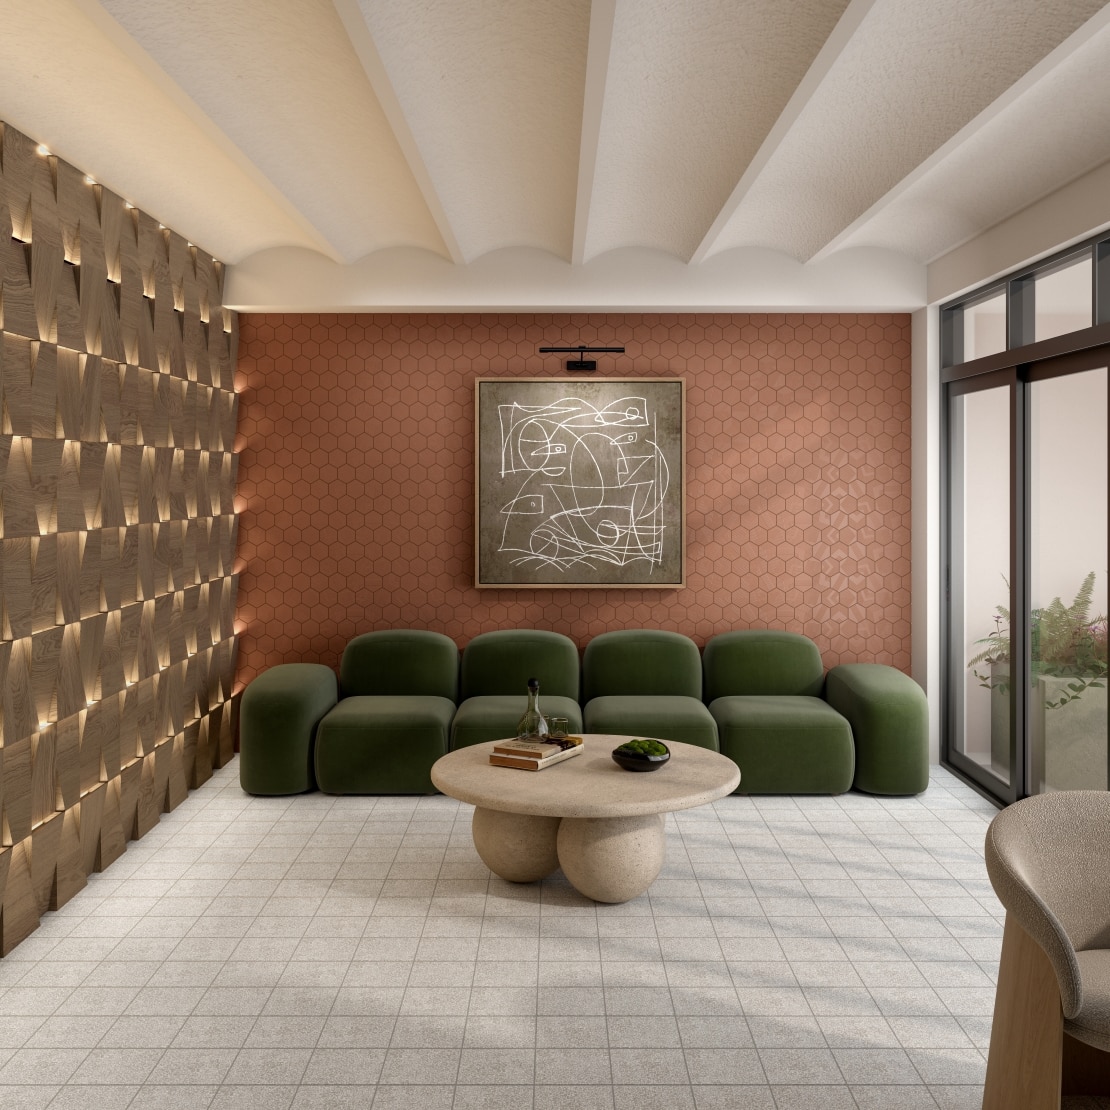 Cozy lounge area with a green modular couch, terracotta wall, golden accent wall and a stone coffee table.